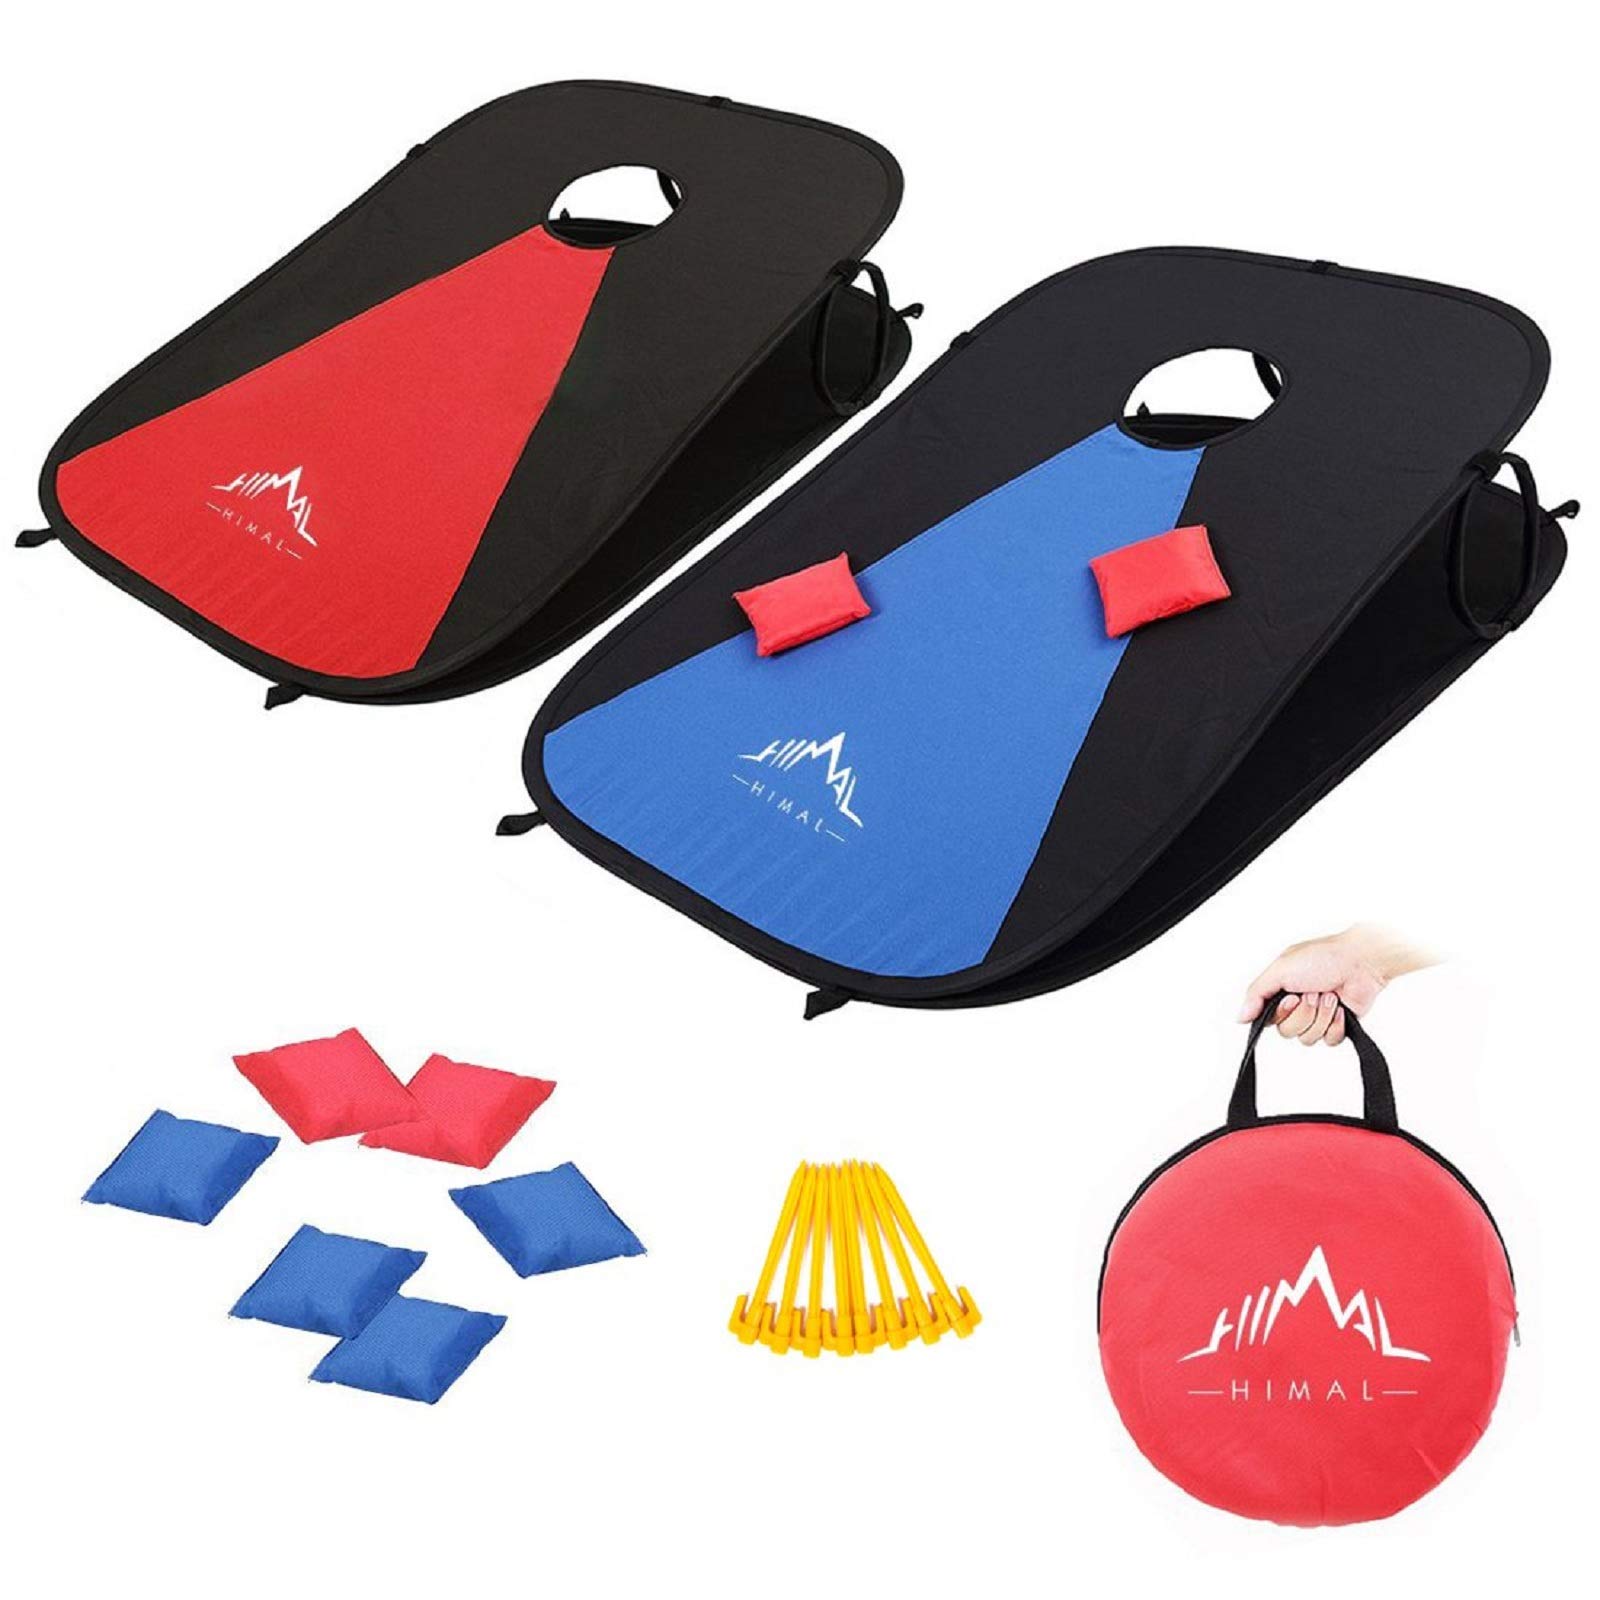 HIMAL Collapsible Portable Corn Hole Boards With 8 Cornhole Bean Bags